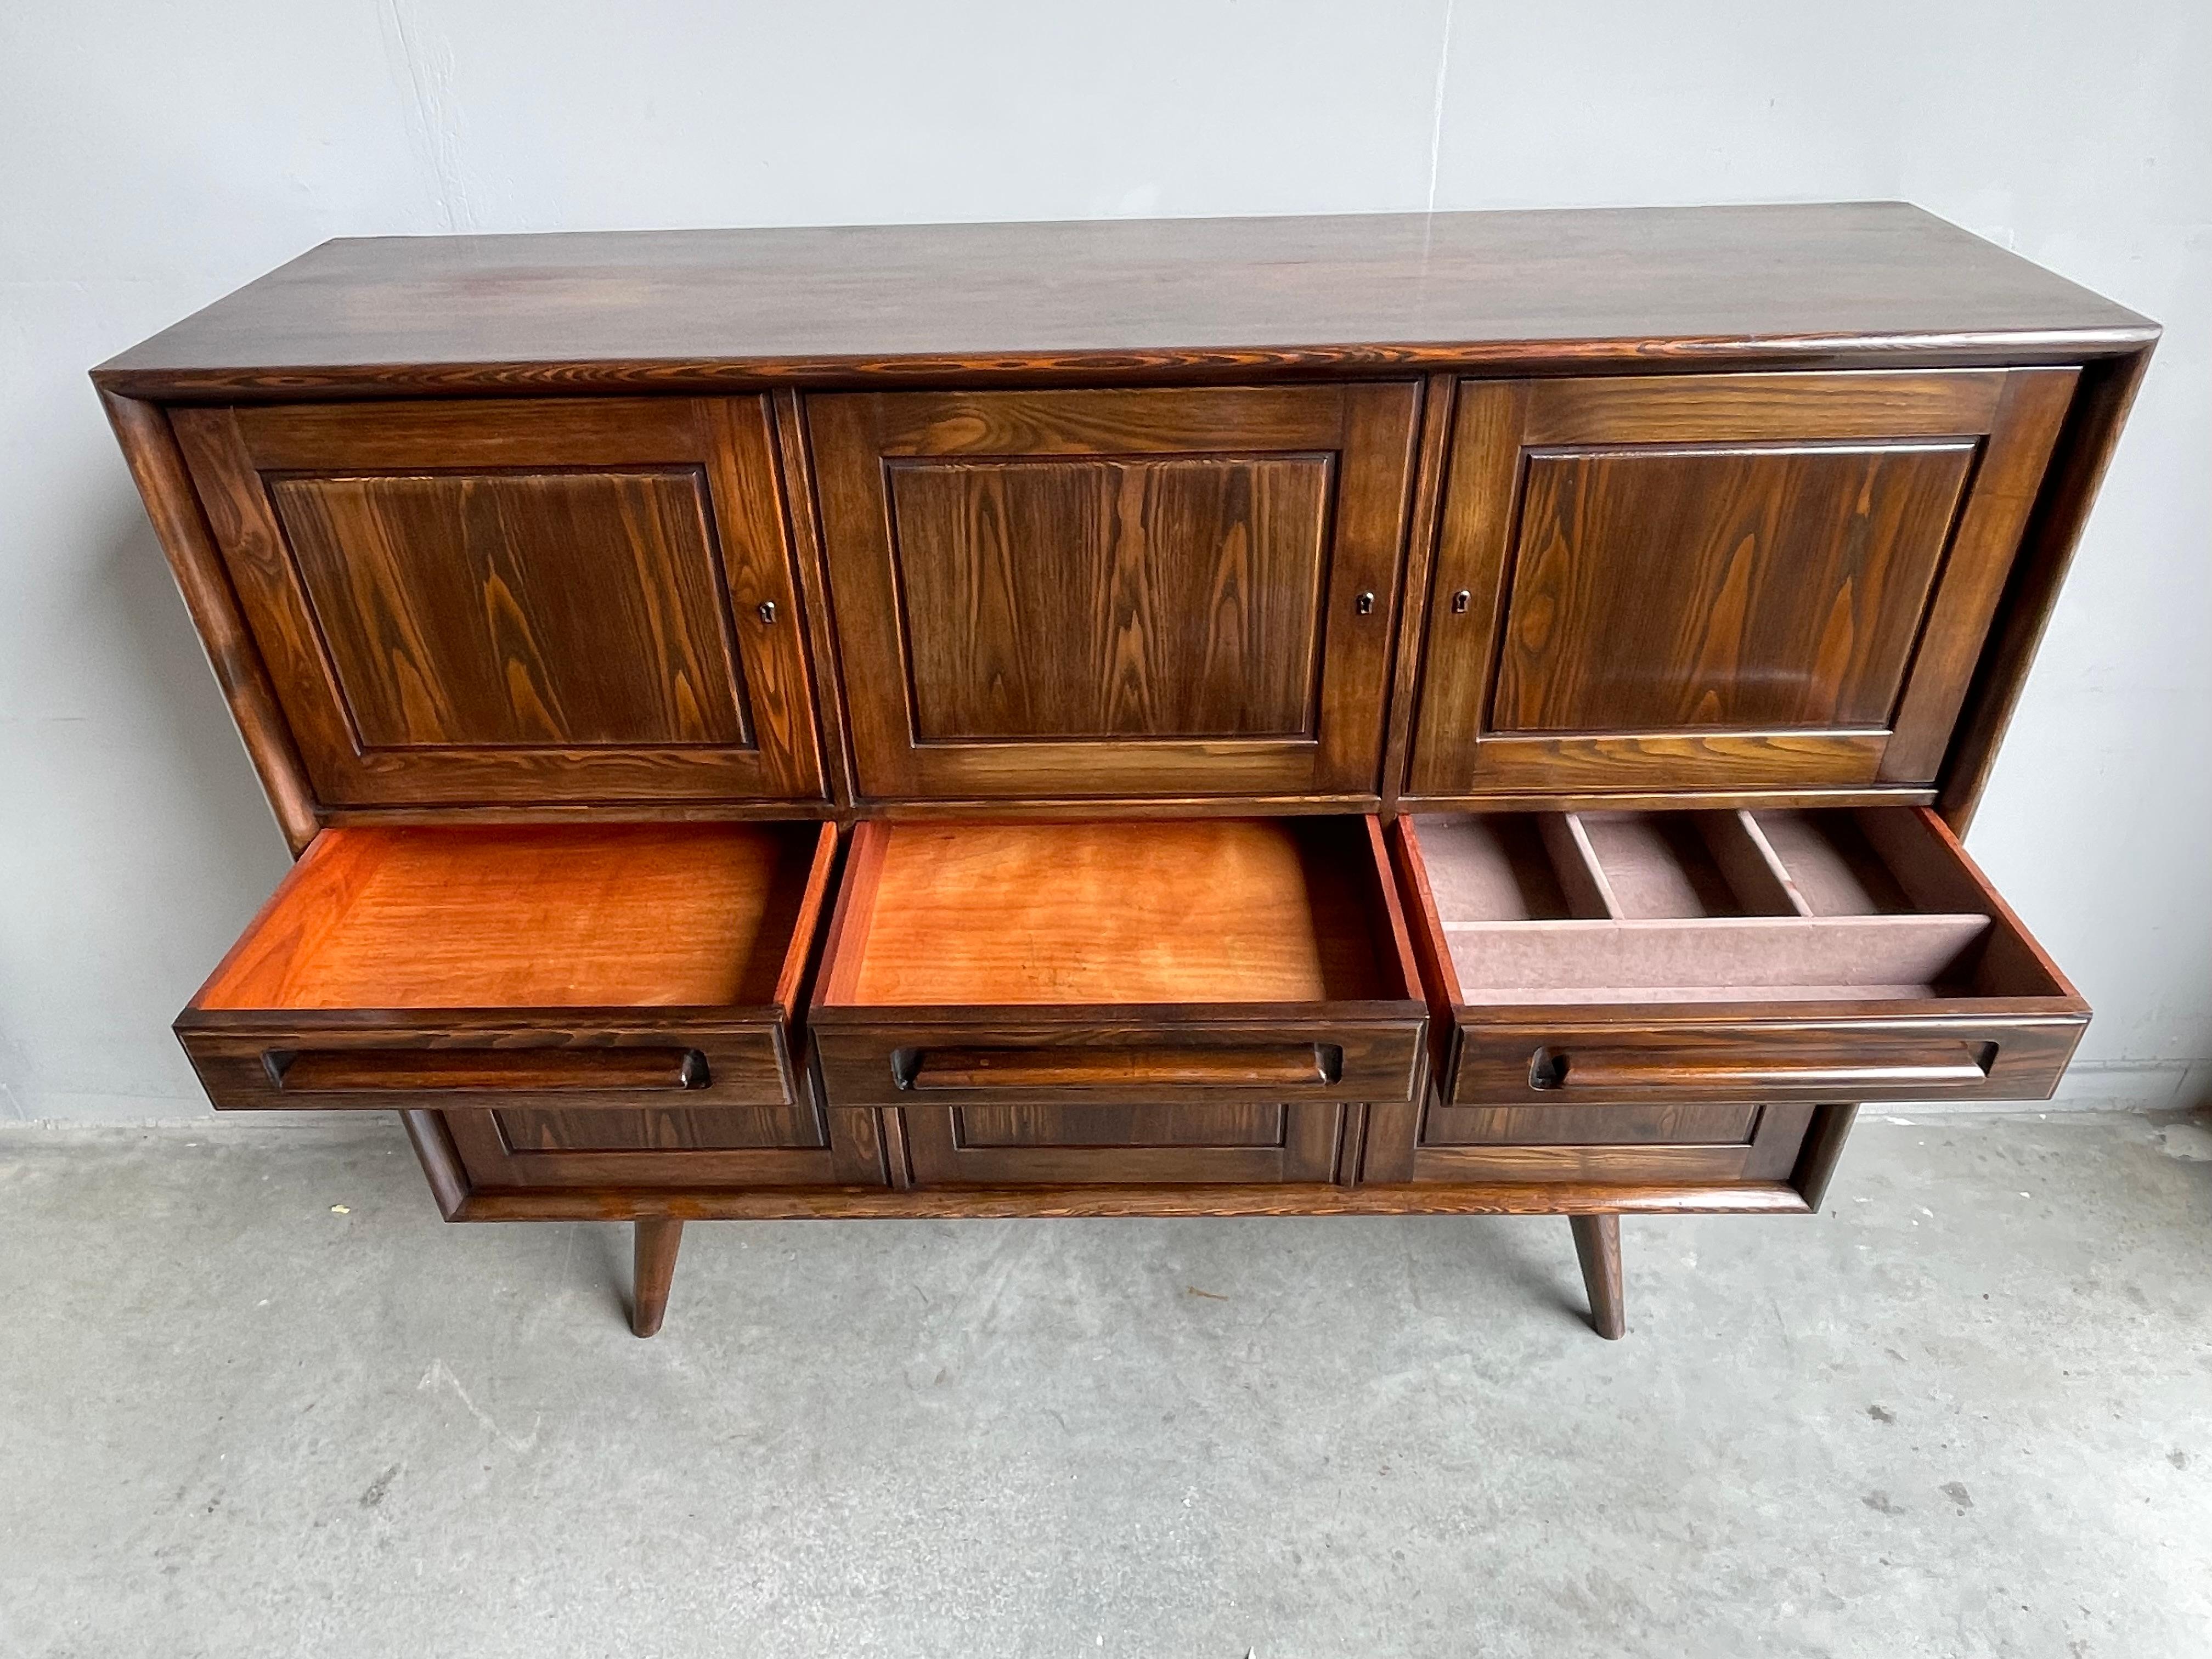 Very Rare Mid-Century Modern Sideboard / Credenza by 't Woonhuys of Amsterdam For Sale 2